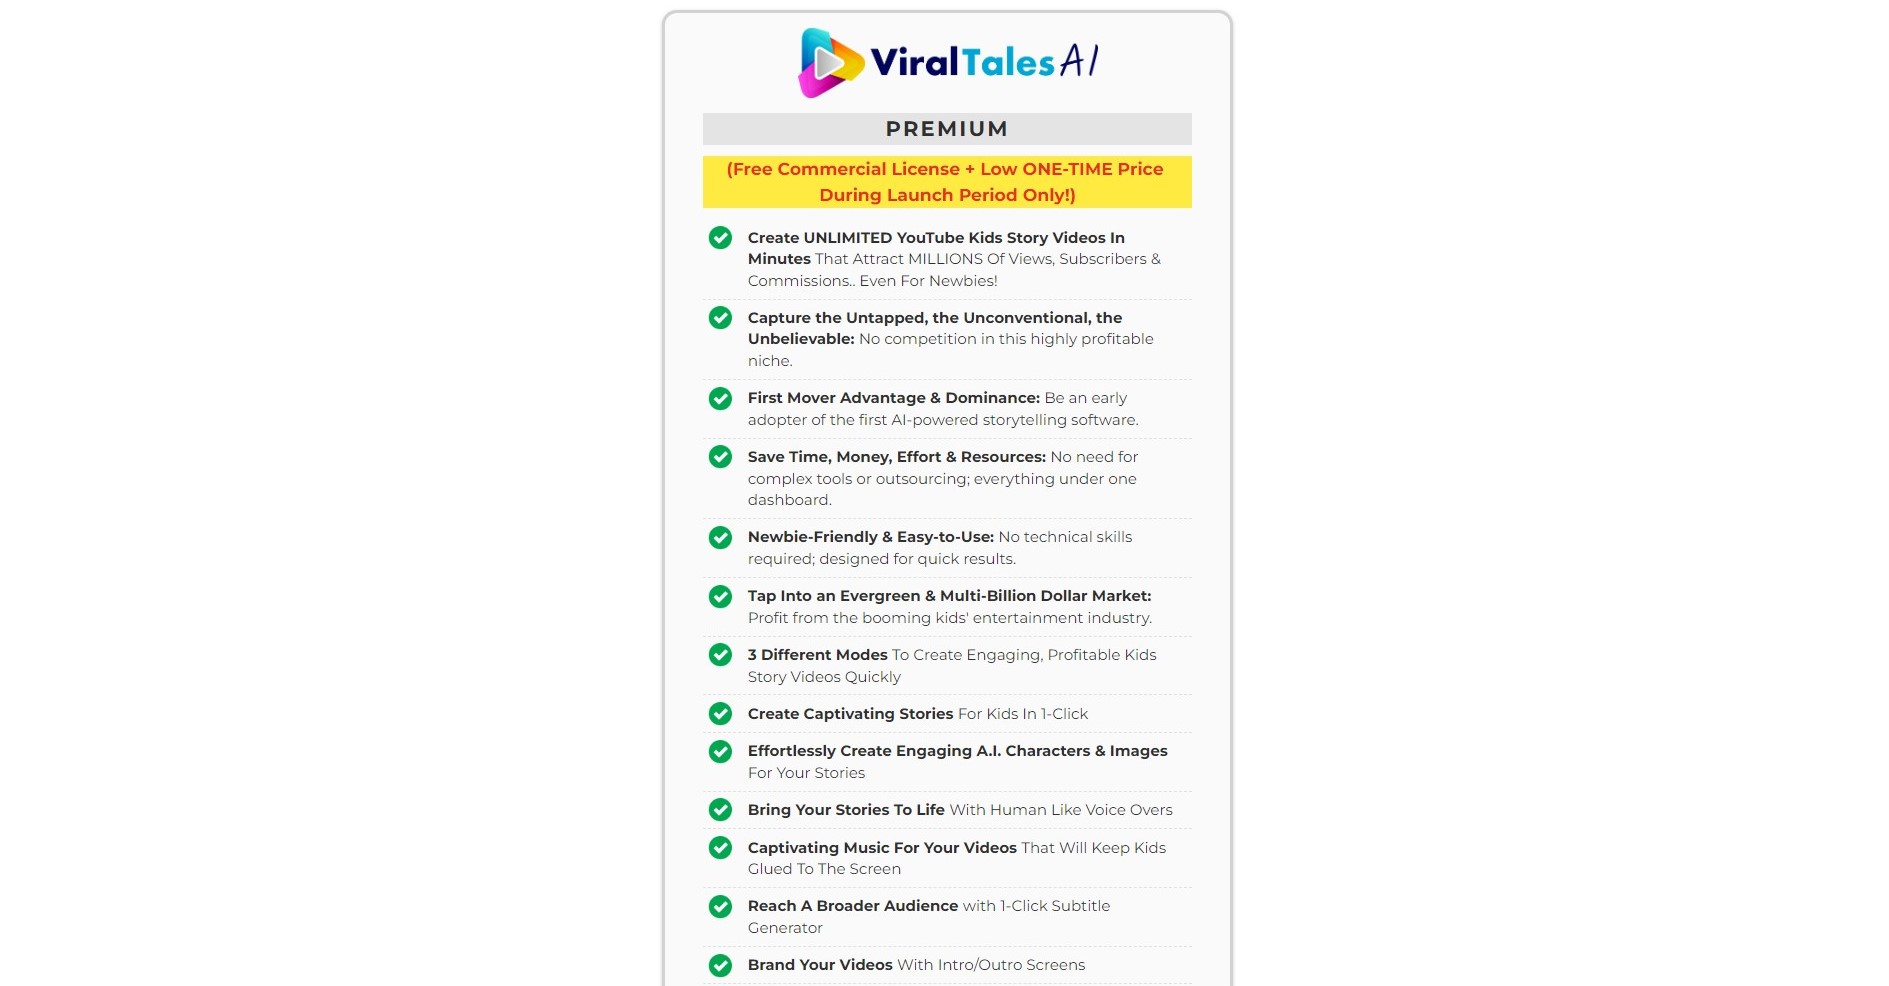 Viraltales AI Review